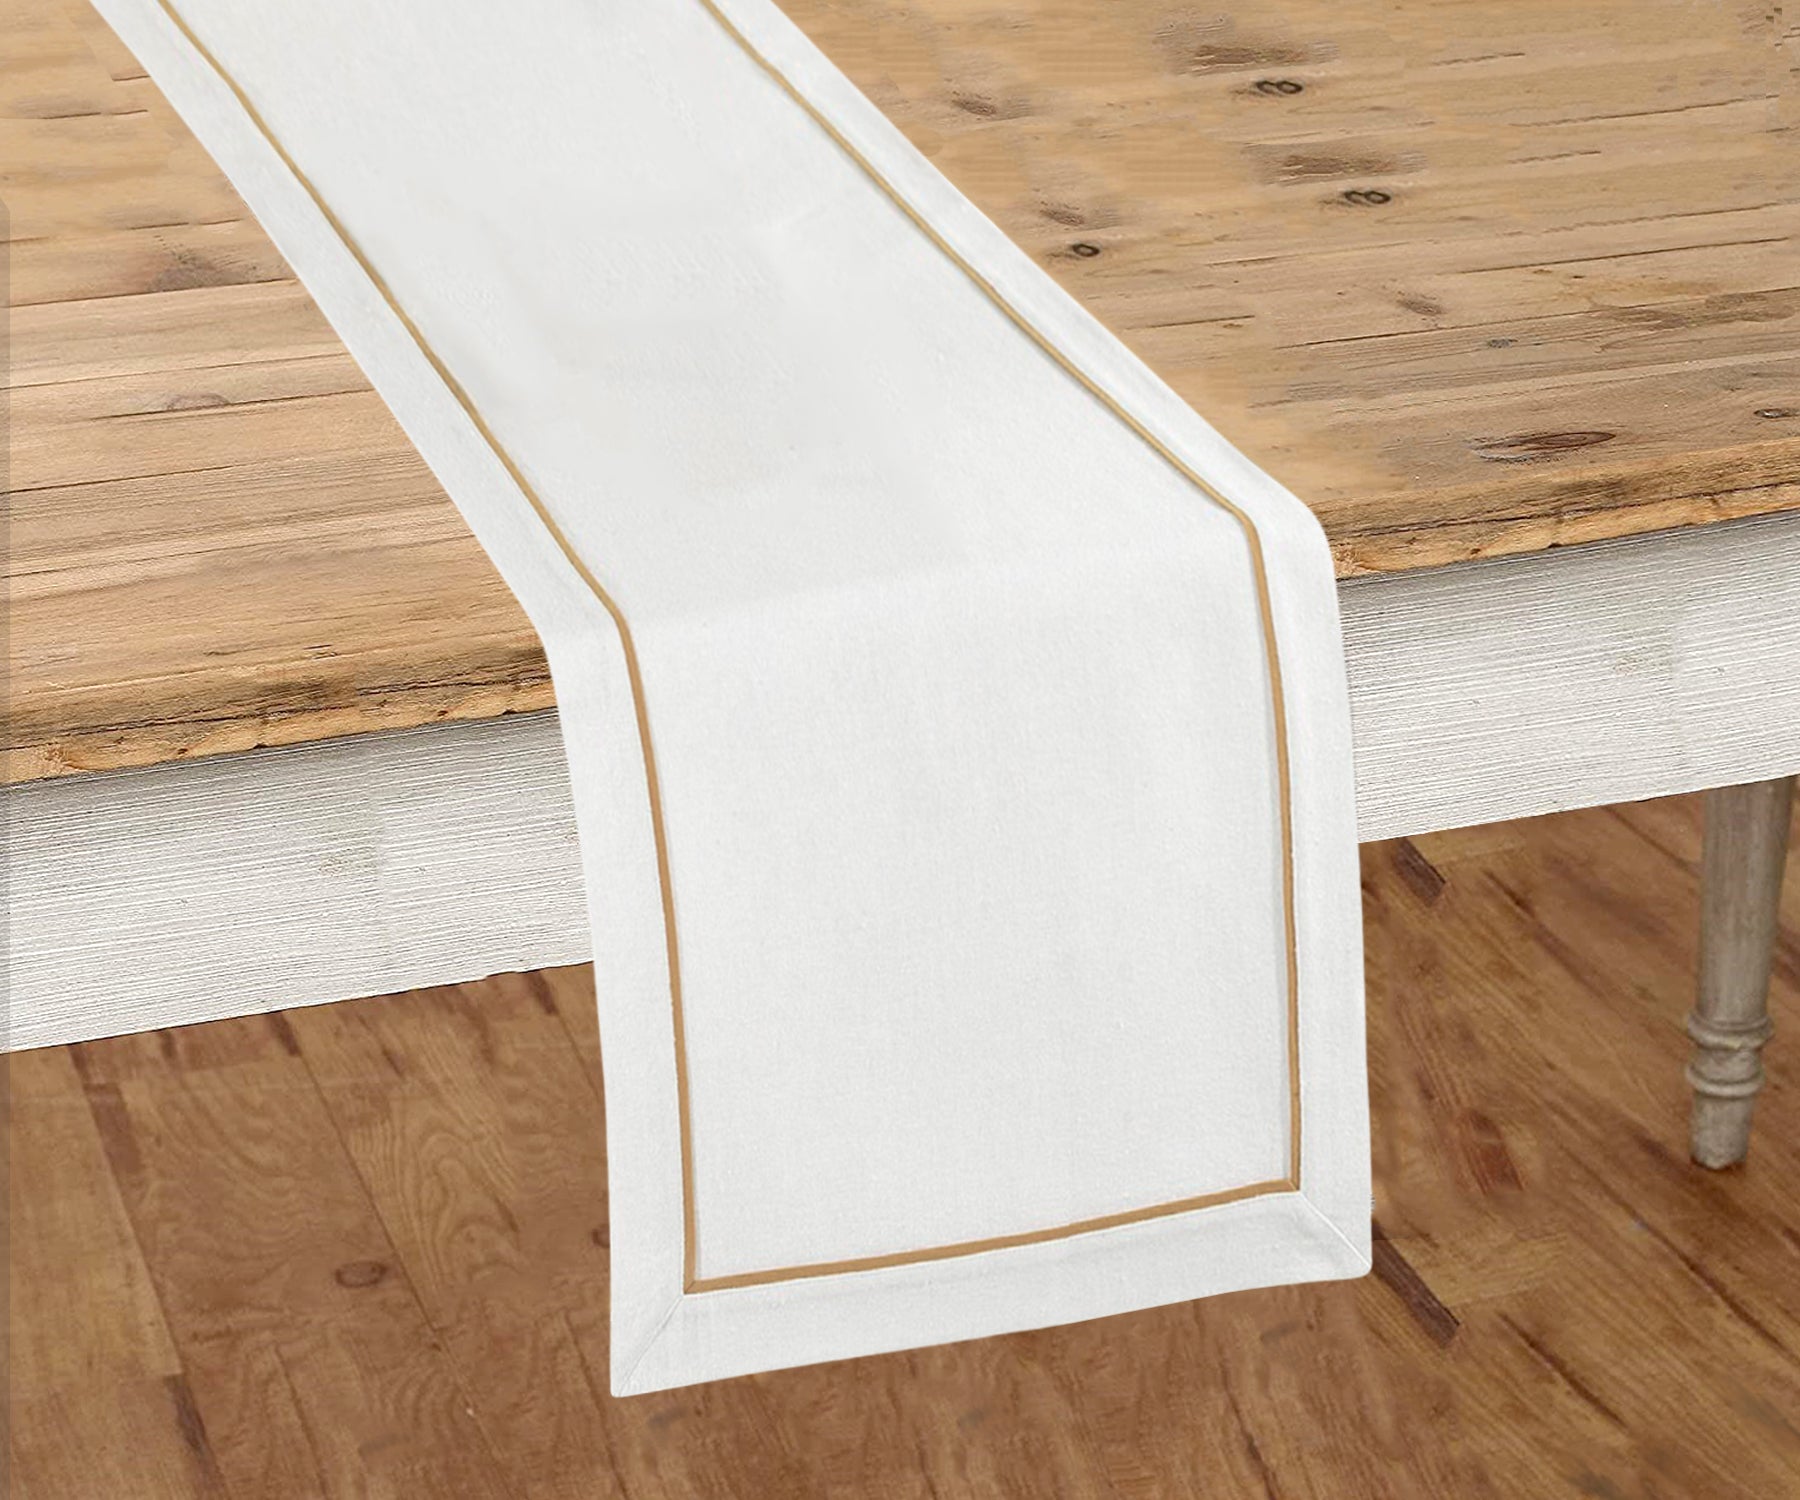 Farmhouse-inspired table runner with delicate embroidery.